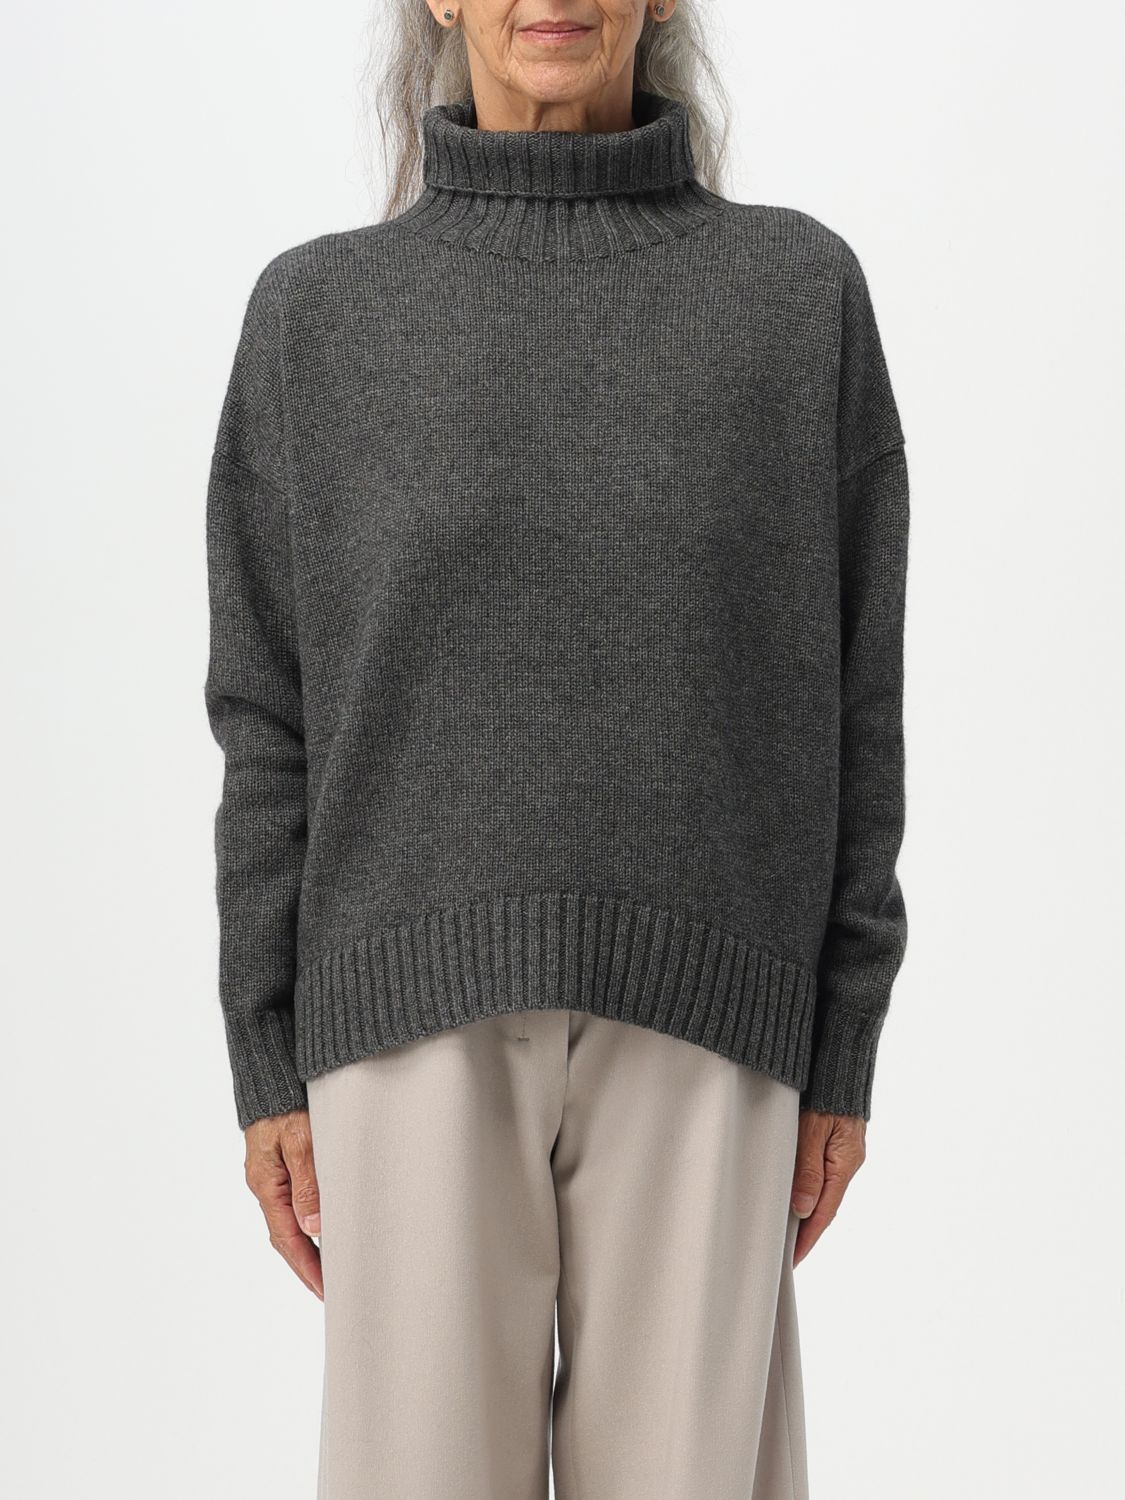 Max Mara Sweater In Wool And Cashmere Blend In Black 1